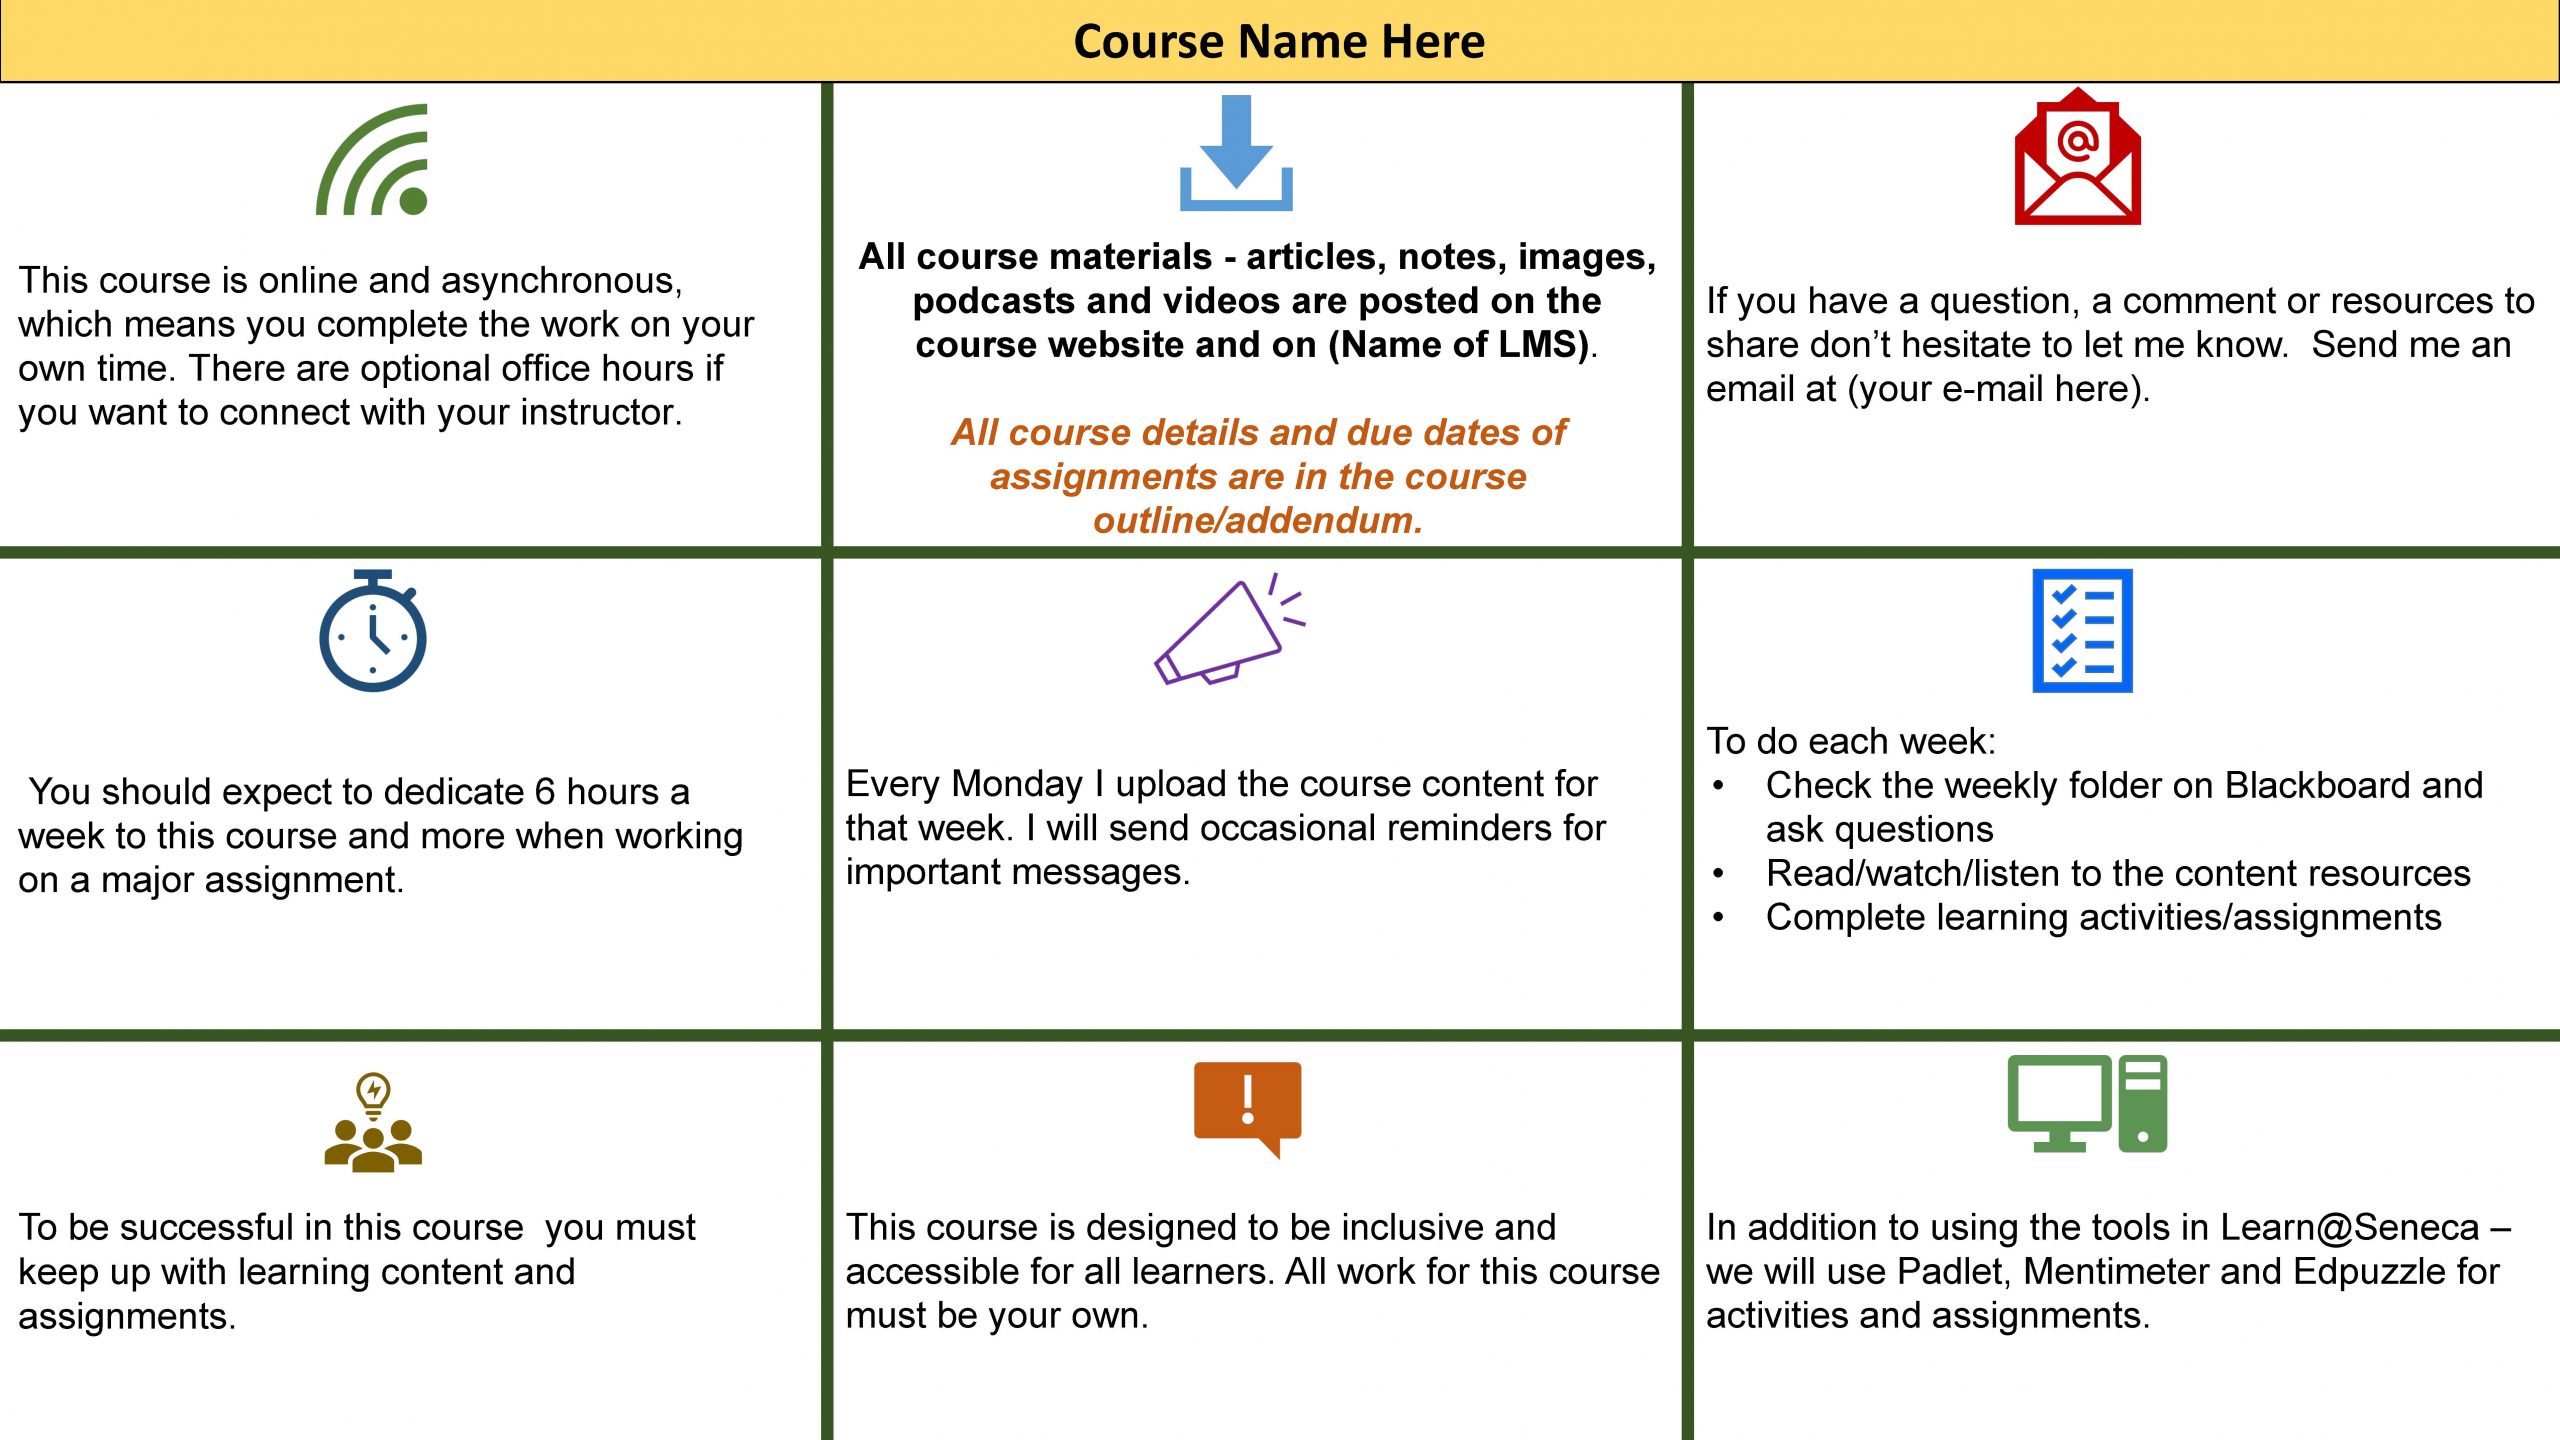 An image of a potential course overview page. See the link below for a readable PDF version.